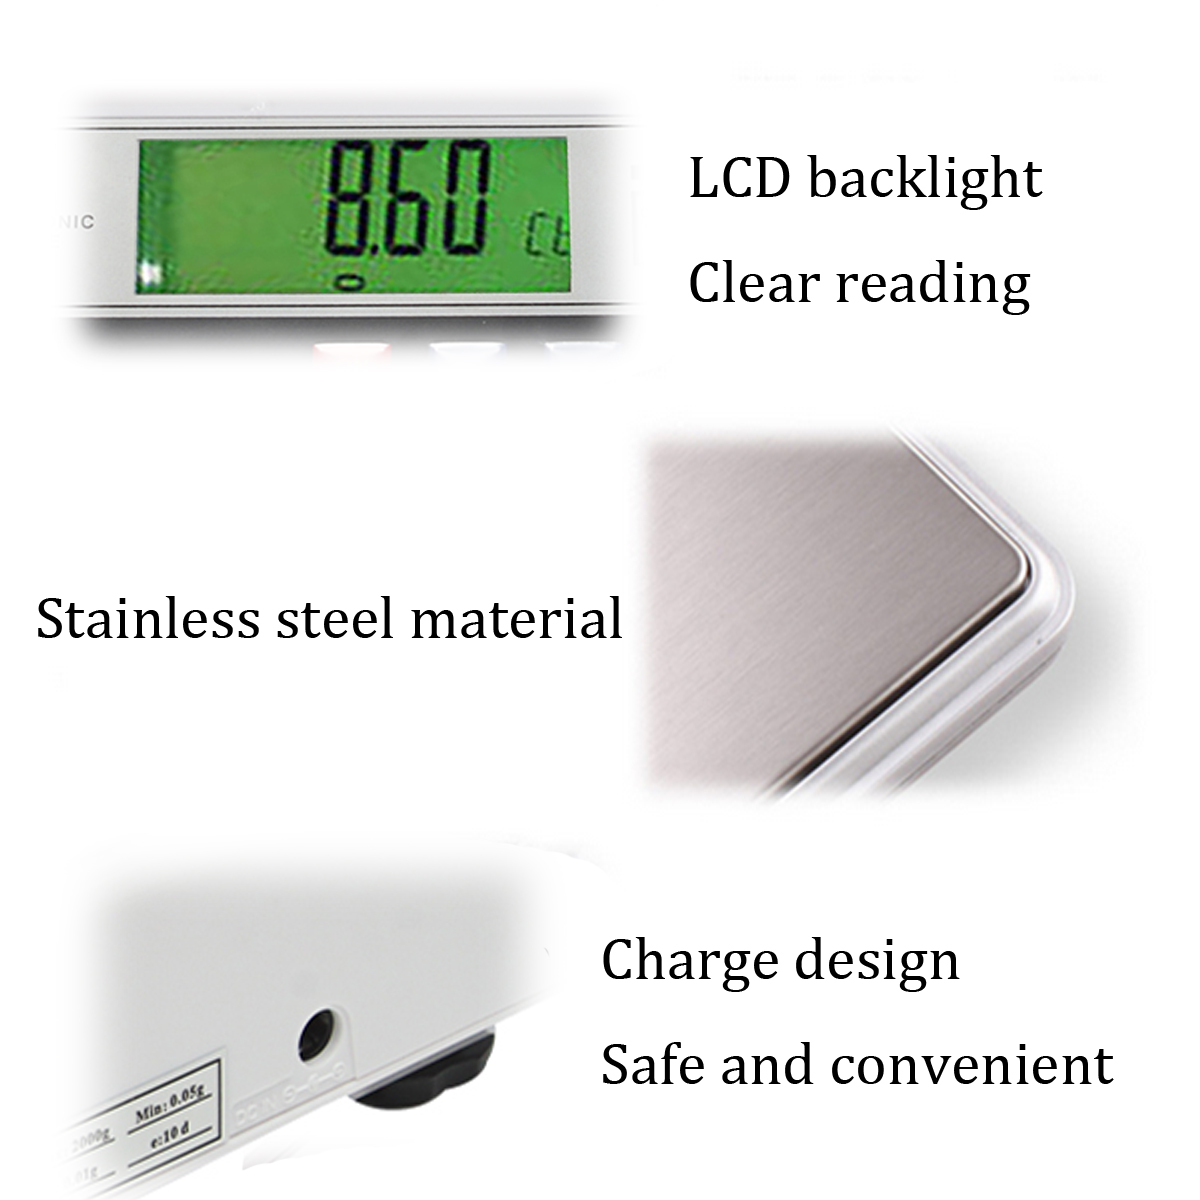 7.5kg x 0.1g LCD Precision Scale Gram Electronic Laboratory Balance Industrial Weighing Scale Kitchen Digital Scale Cooking Tool